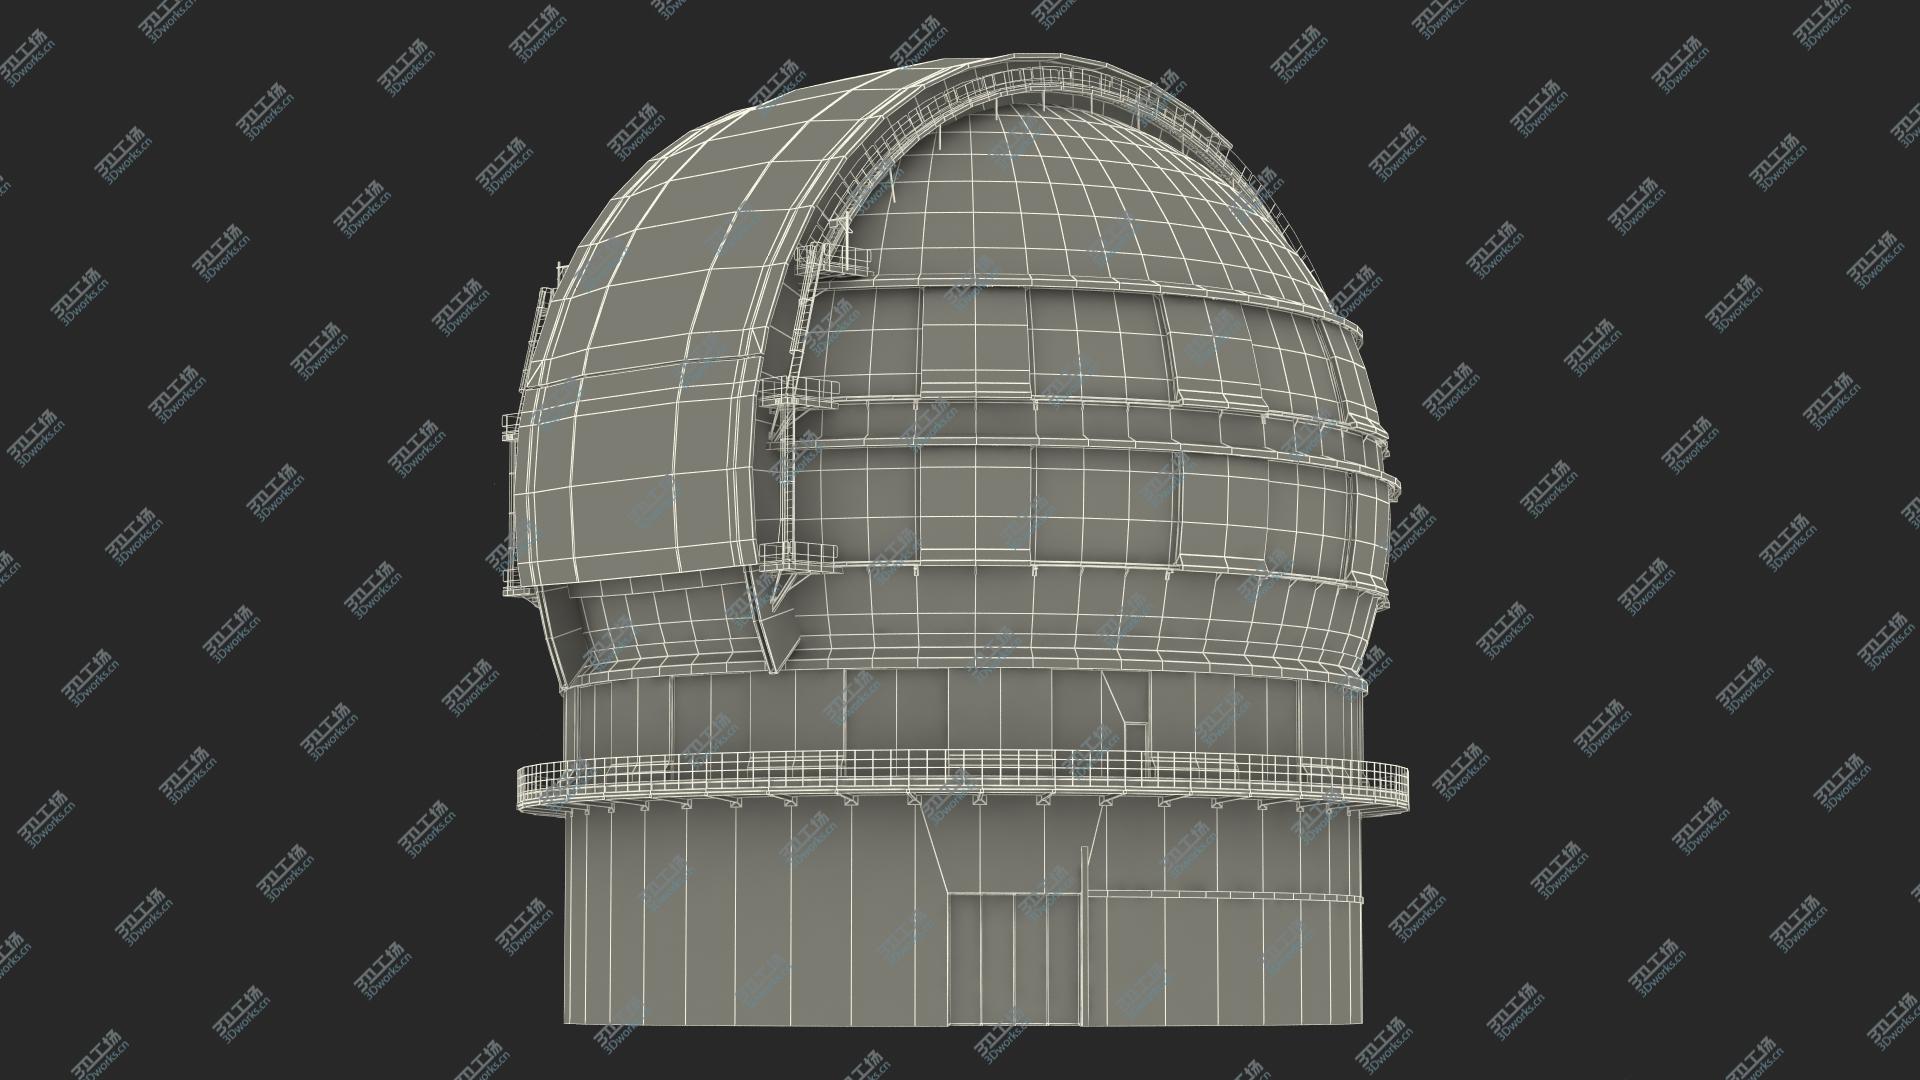 images/goods_img/2021040164/Astronomical Observatory Dome Rigged 3D/4.jpg